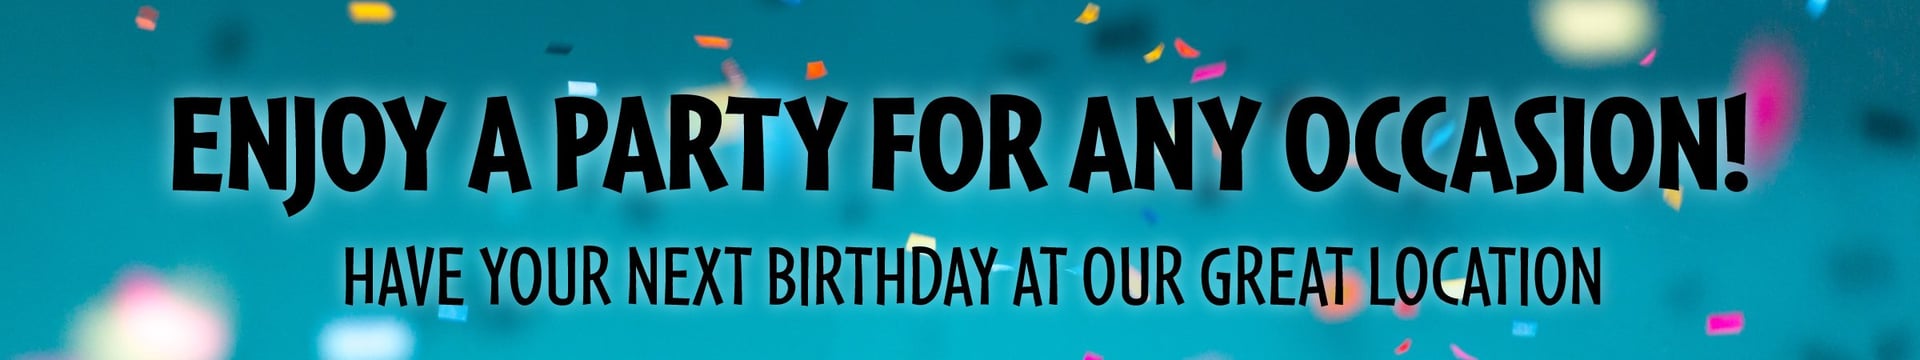 enjoy a party for any occasion! have your next birthday at our great location